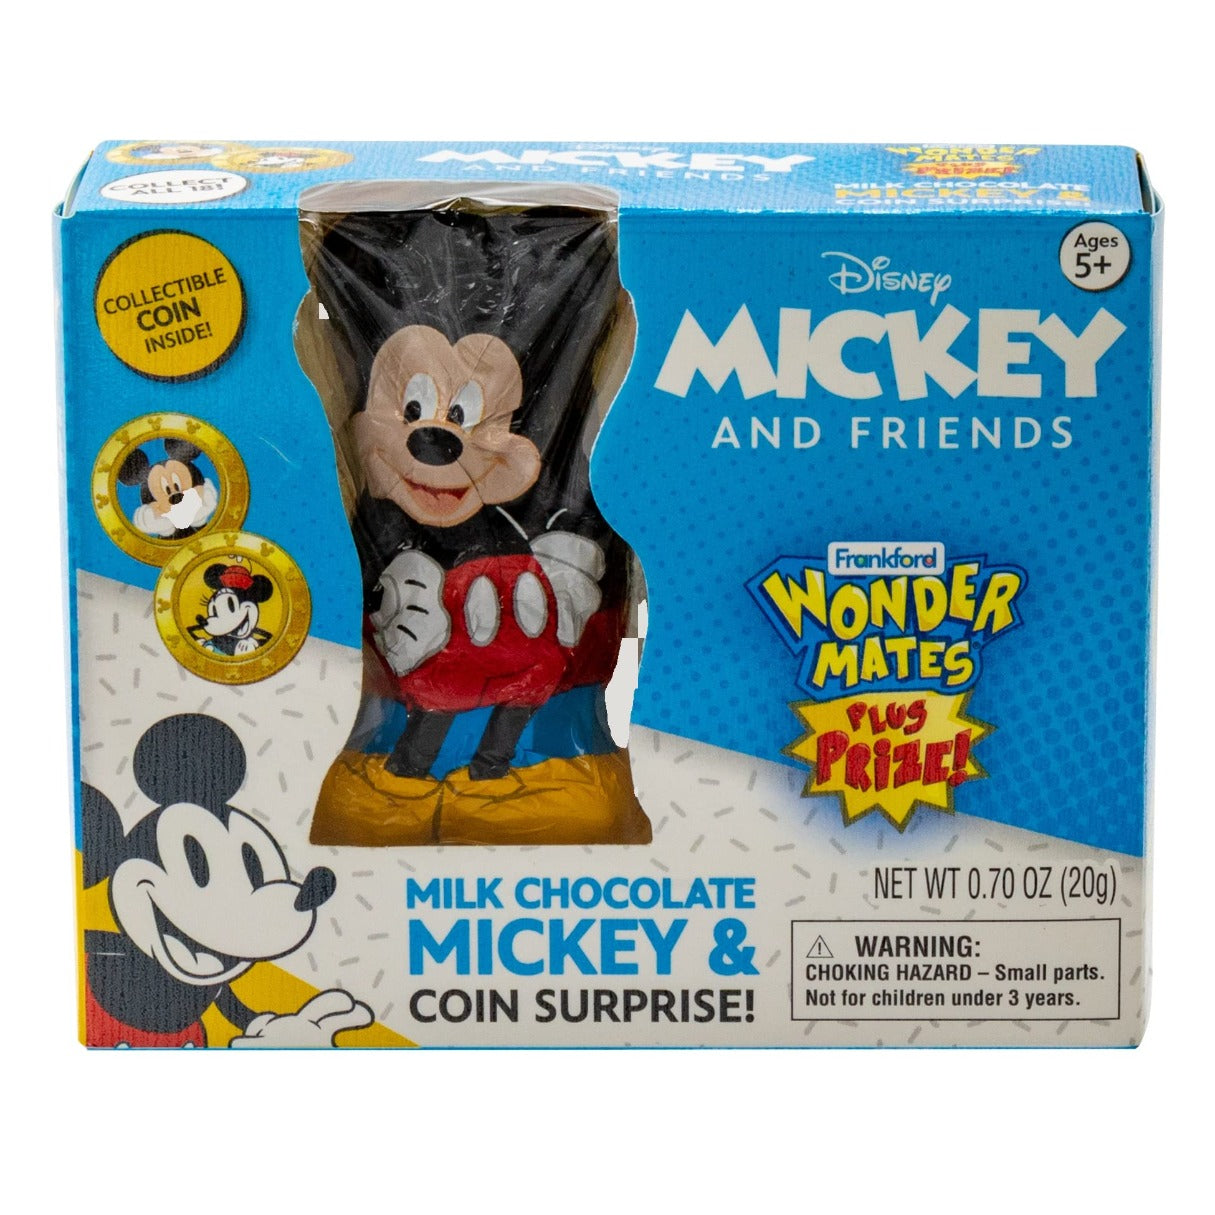 Frankford Mickey and Friends Wonder Mates Milk Chocolate Candy & Coin Surprise  .70oz - 84ct